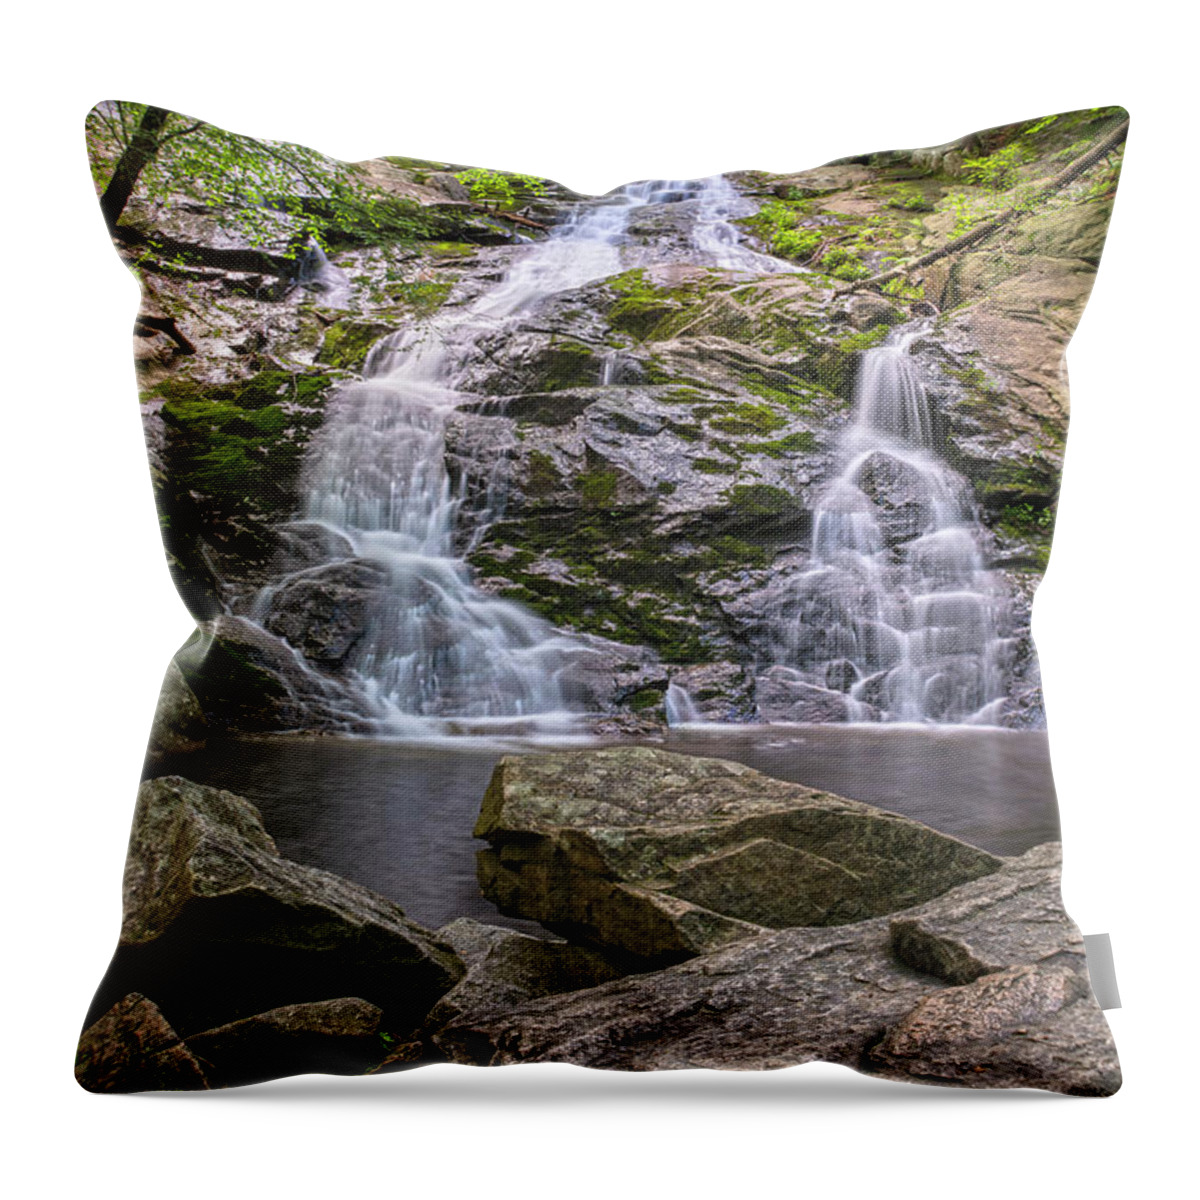 Waterfalls Throw Pillow featuring the photograph Mineral Springs Vertical by Angelo Marcialis